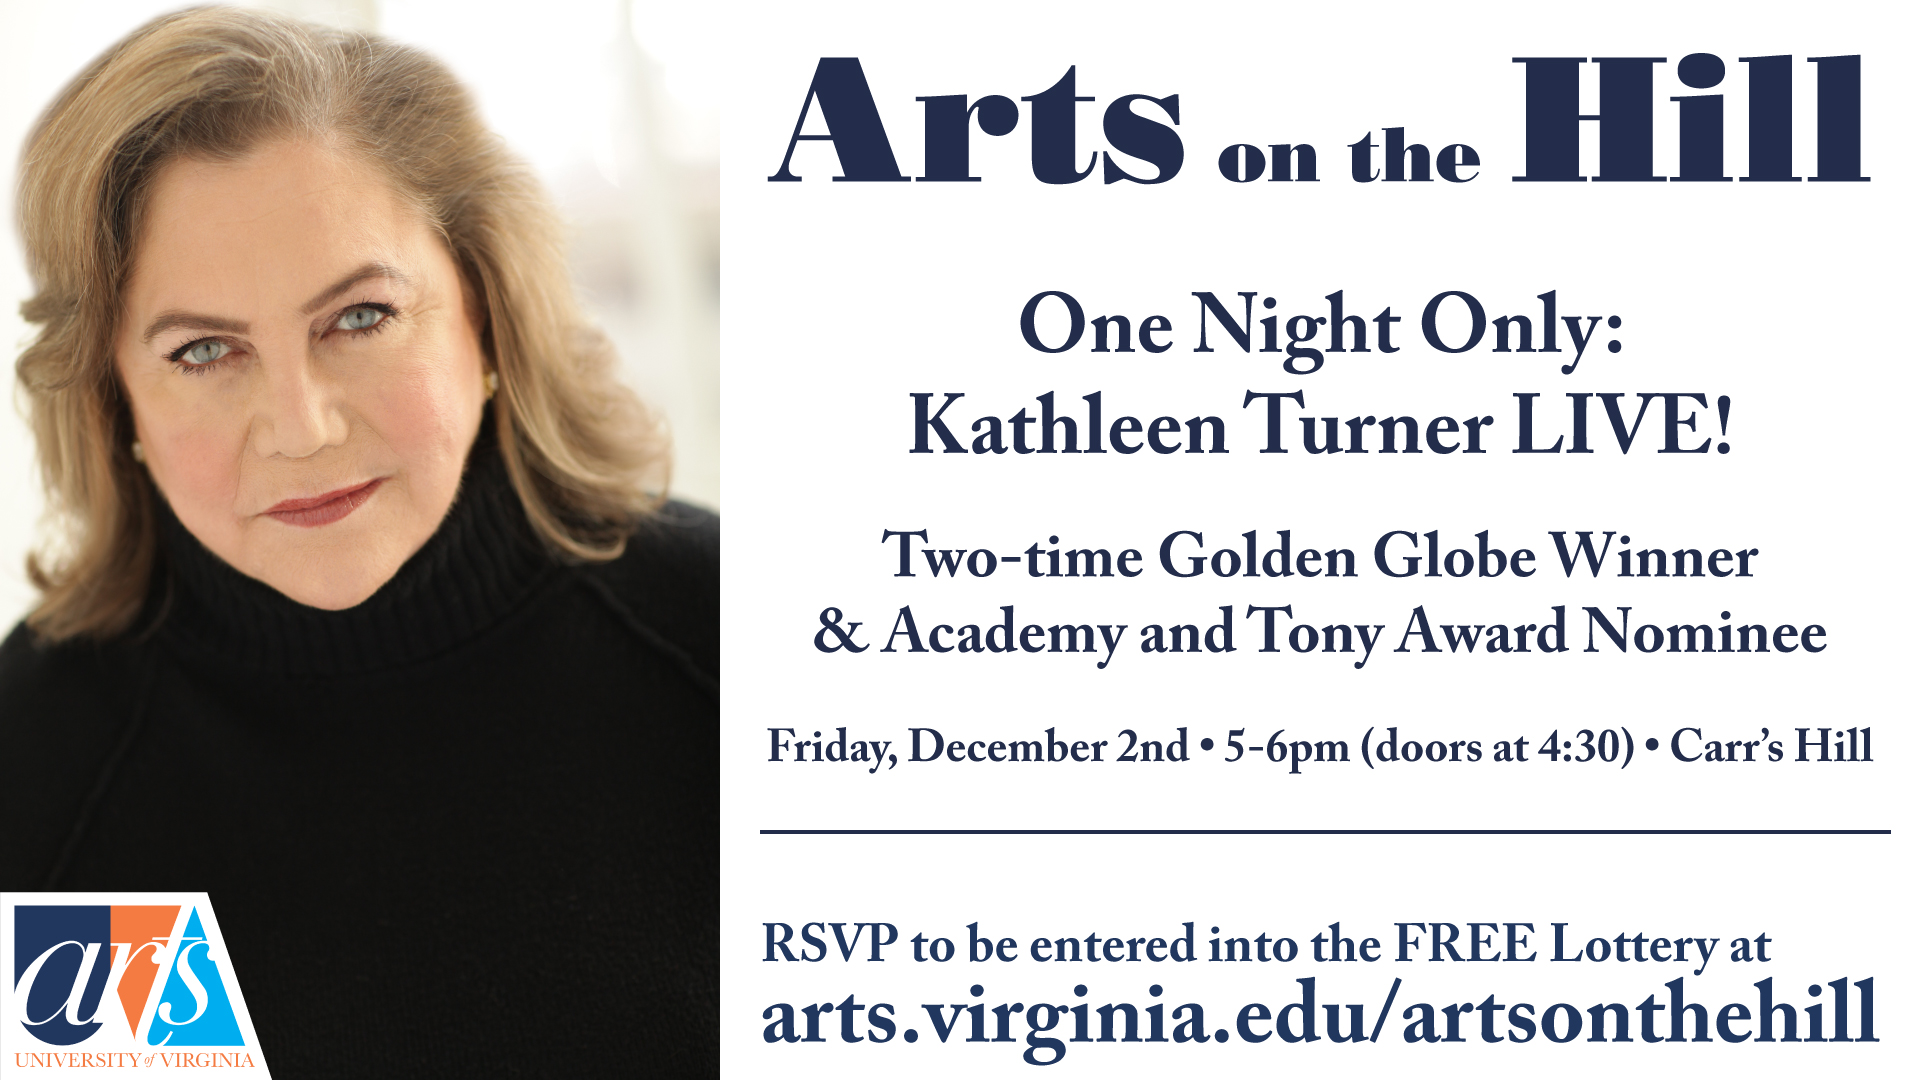 Arts on the Hill: One Night Only: Kathleen Turner LIVE!